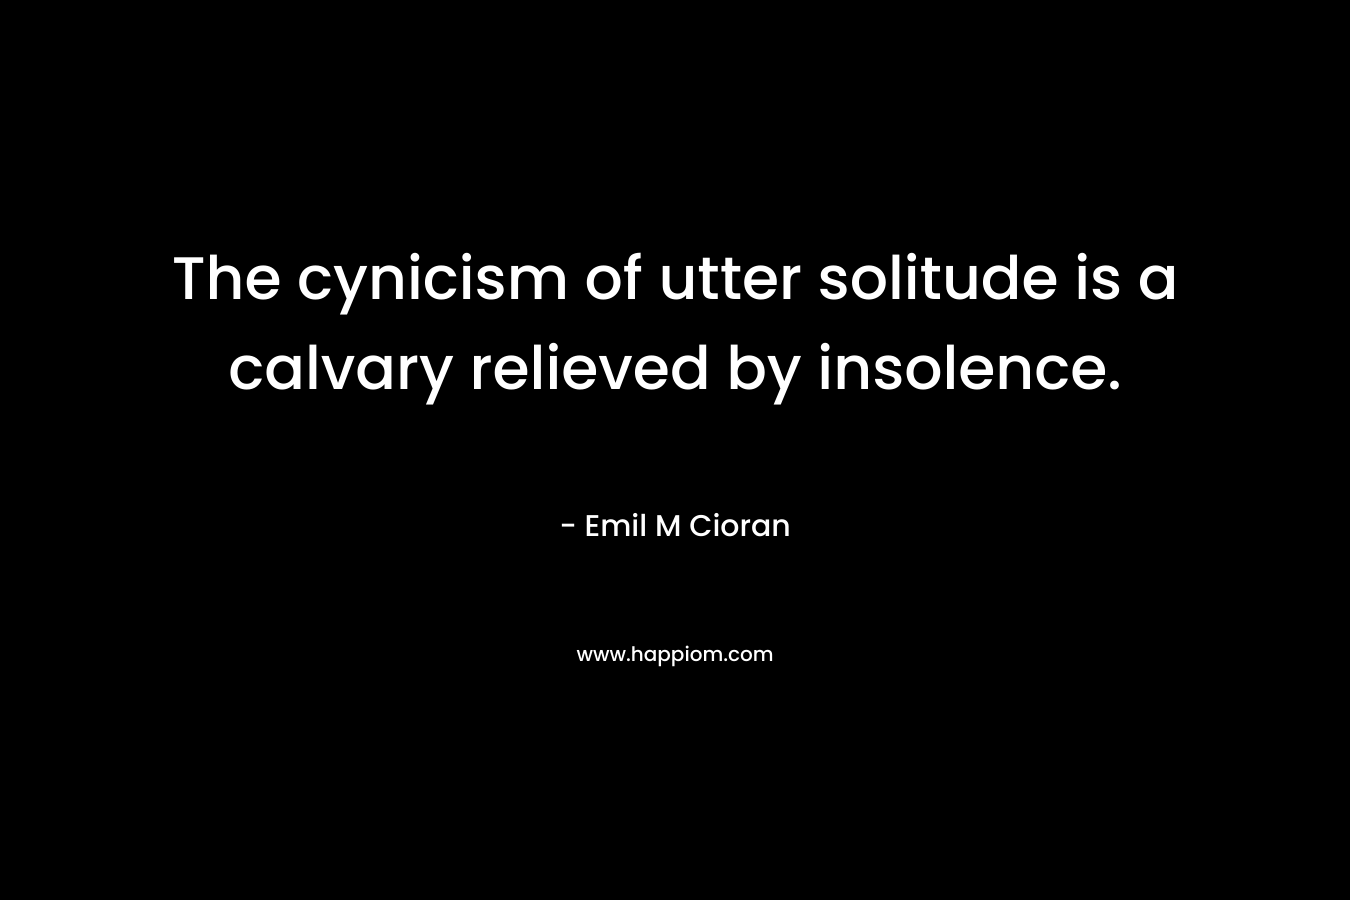 The cynicism of utter solitude is a calvary relieved by insolence. – Emil M Cioran